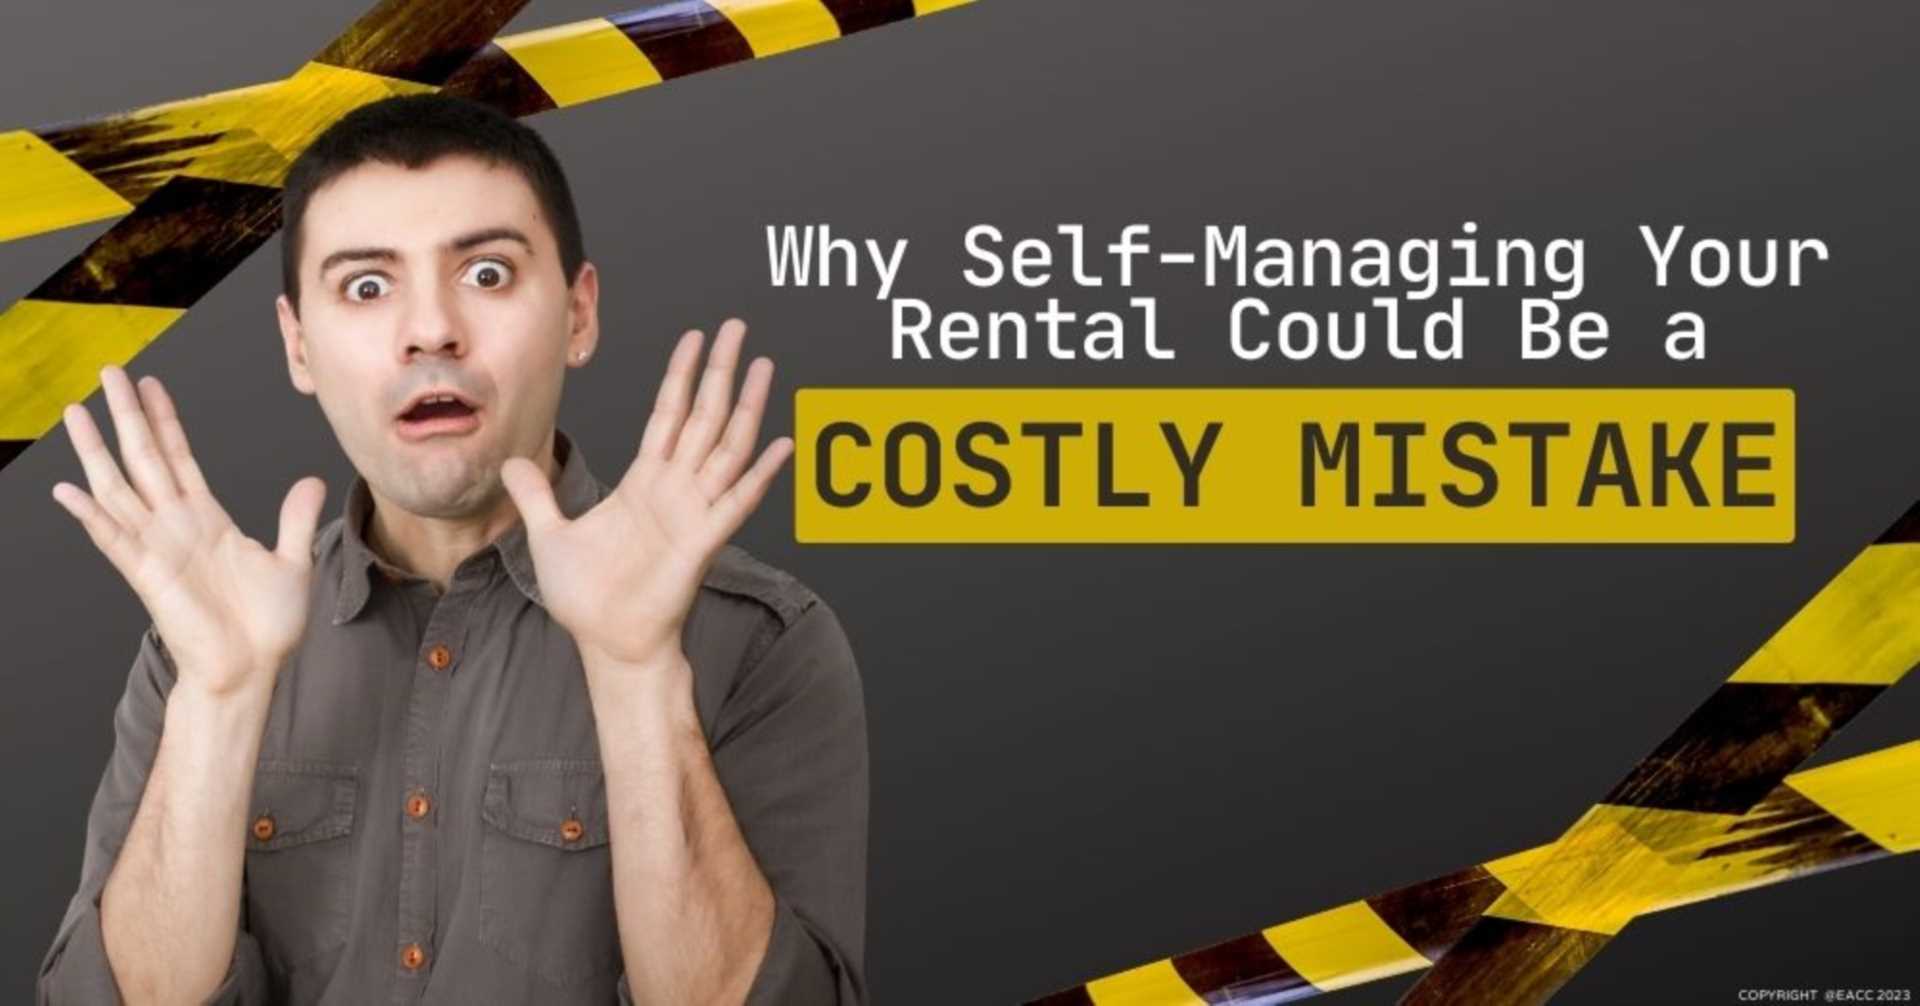 Why Self-Managing Your Rental Might Not Be the Money Saver You Think It Is